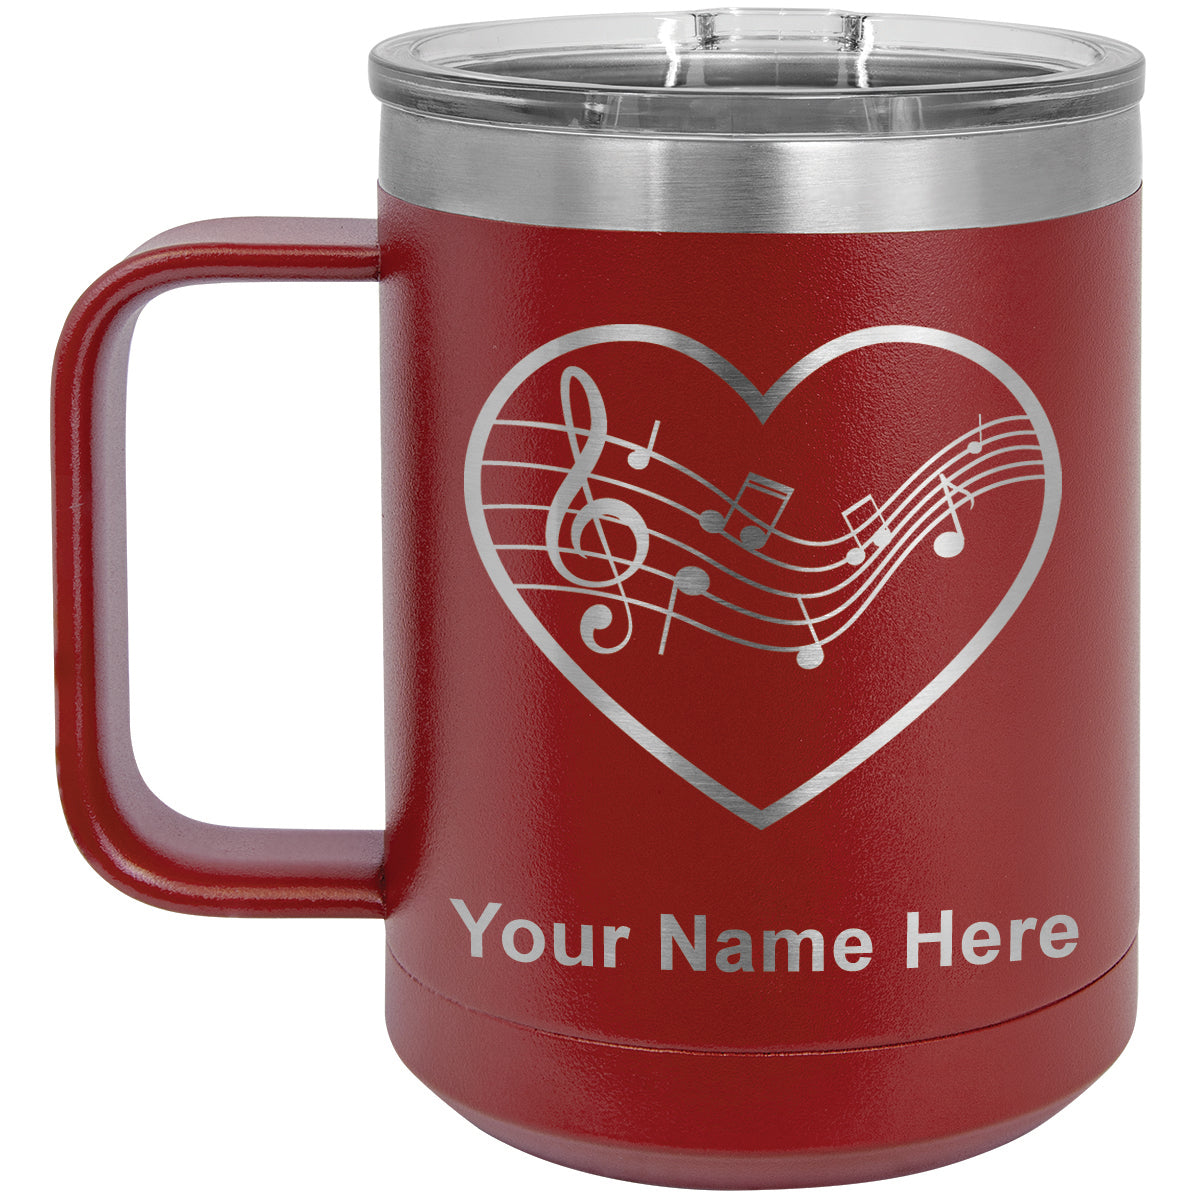 15oz Vacuum Insulated Coffee Mug, Music Staff Heart, Personalized Engraving Included